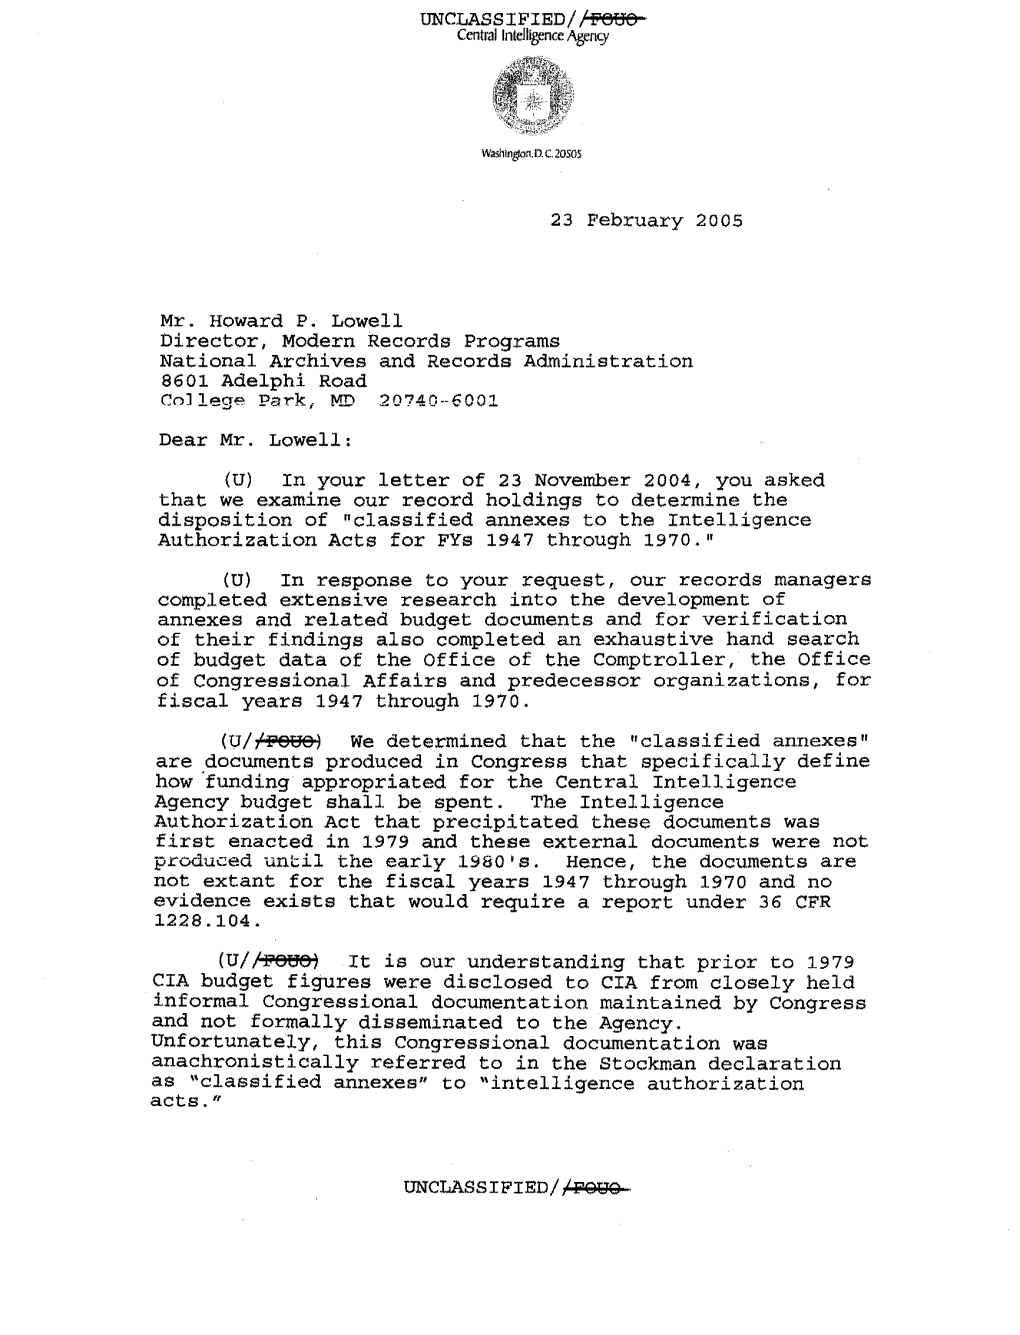 CIA Letter Says